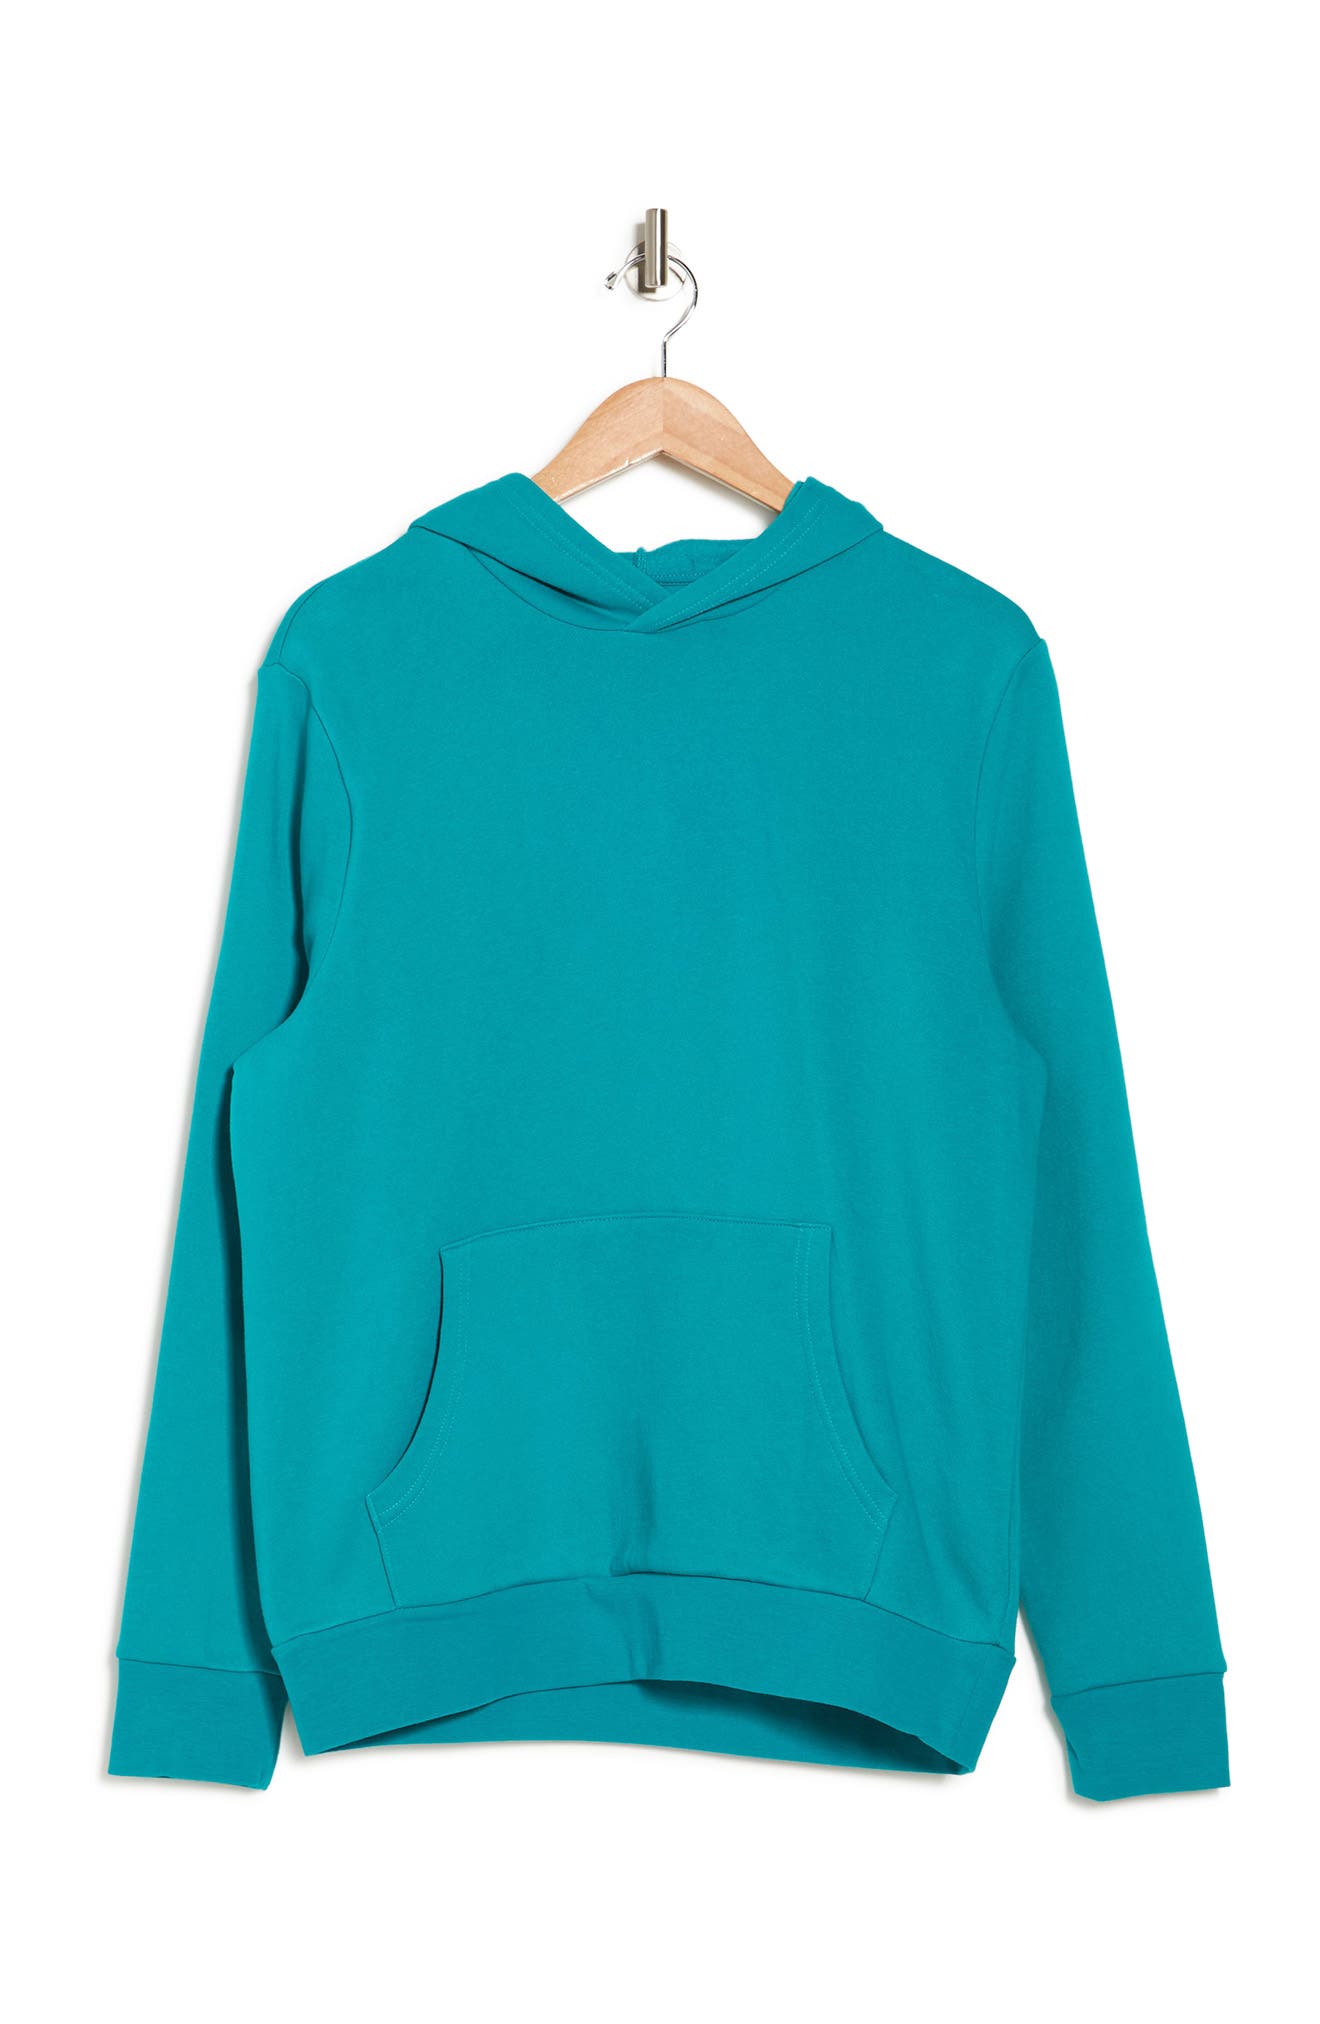 Abound Fleece Pullover Hoodie In Teal Compass